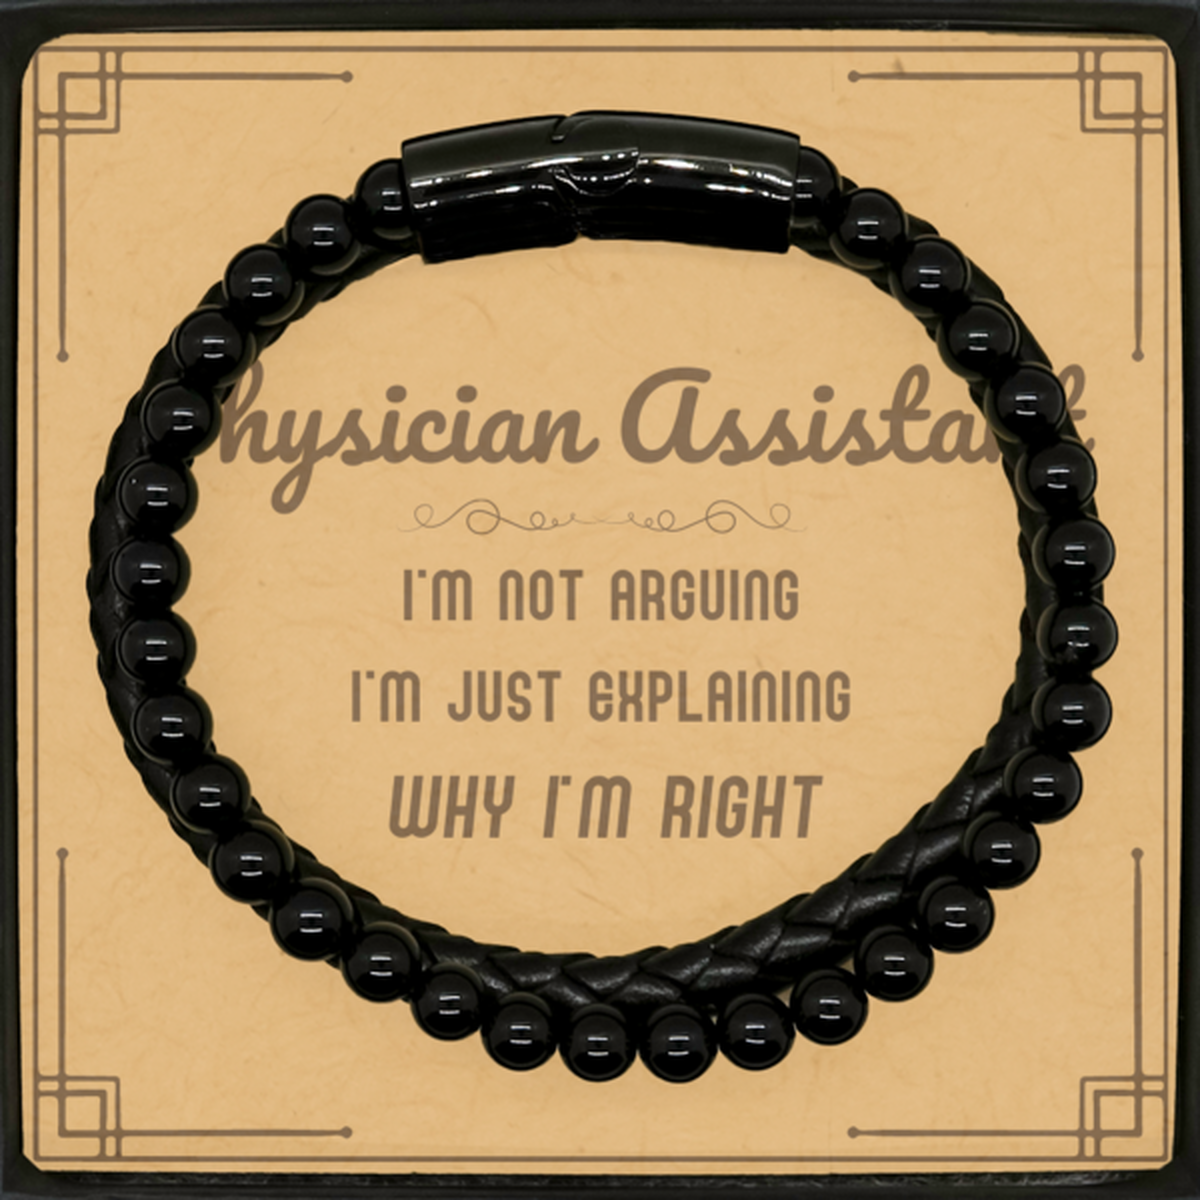 Physician Assistant I'm not Arguing. I'm Just Explaining Why I'm RIGHT Stone Leather Bracelets, Funny Saying Quote Physician Assistant Gifts For Physician Assistant Message Card Graduation Birthday Christmas Gifts for Men Women Coworker